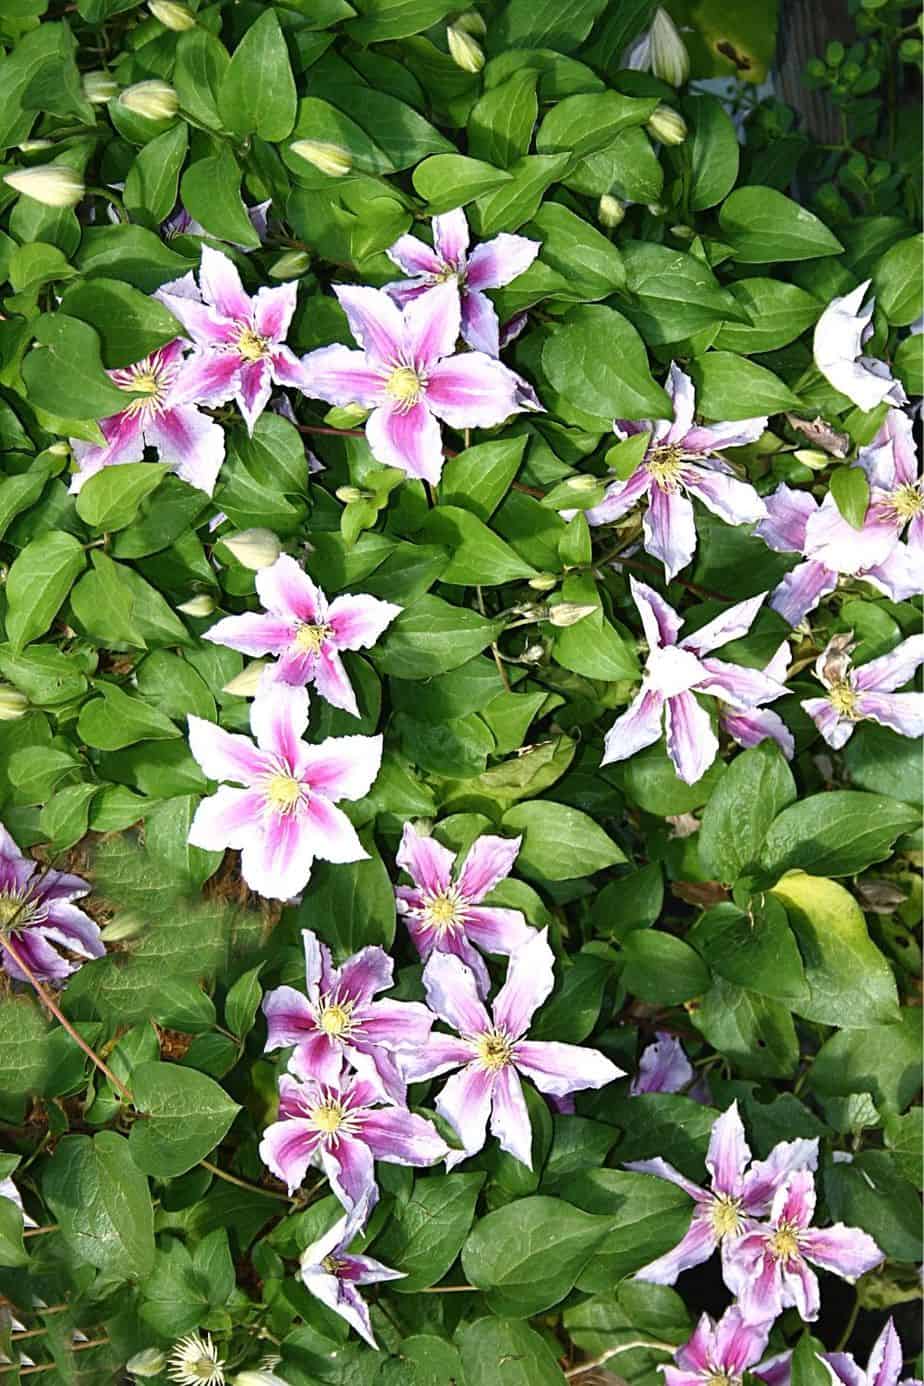 Clematis is a low-maintenance flower that you can grow on an east-facing balcony